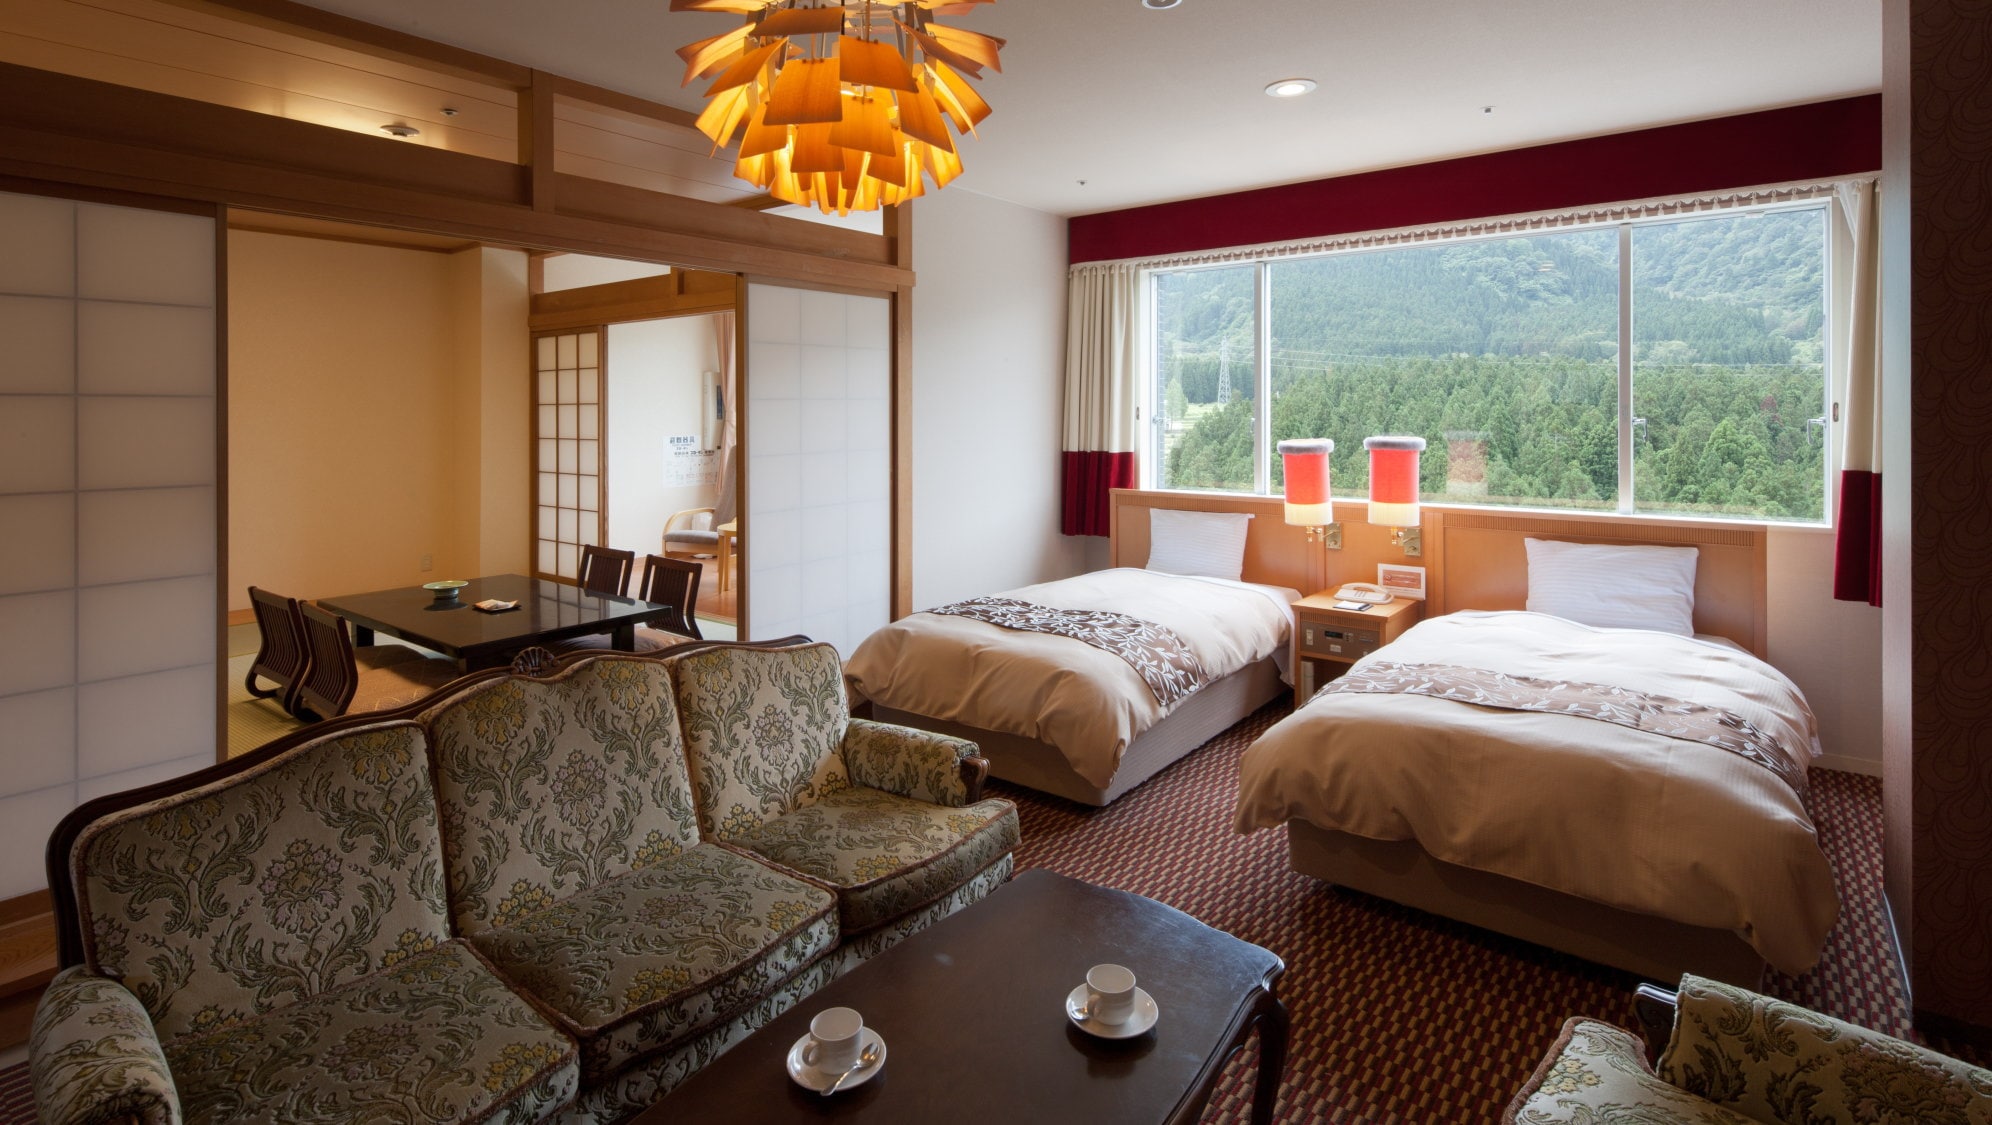  [Executive Deluxe] 65m2 + Japanese-style room with 8 tatami mats and the next largest room after the suite, please relax and relax.